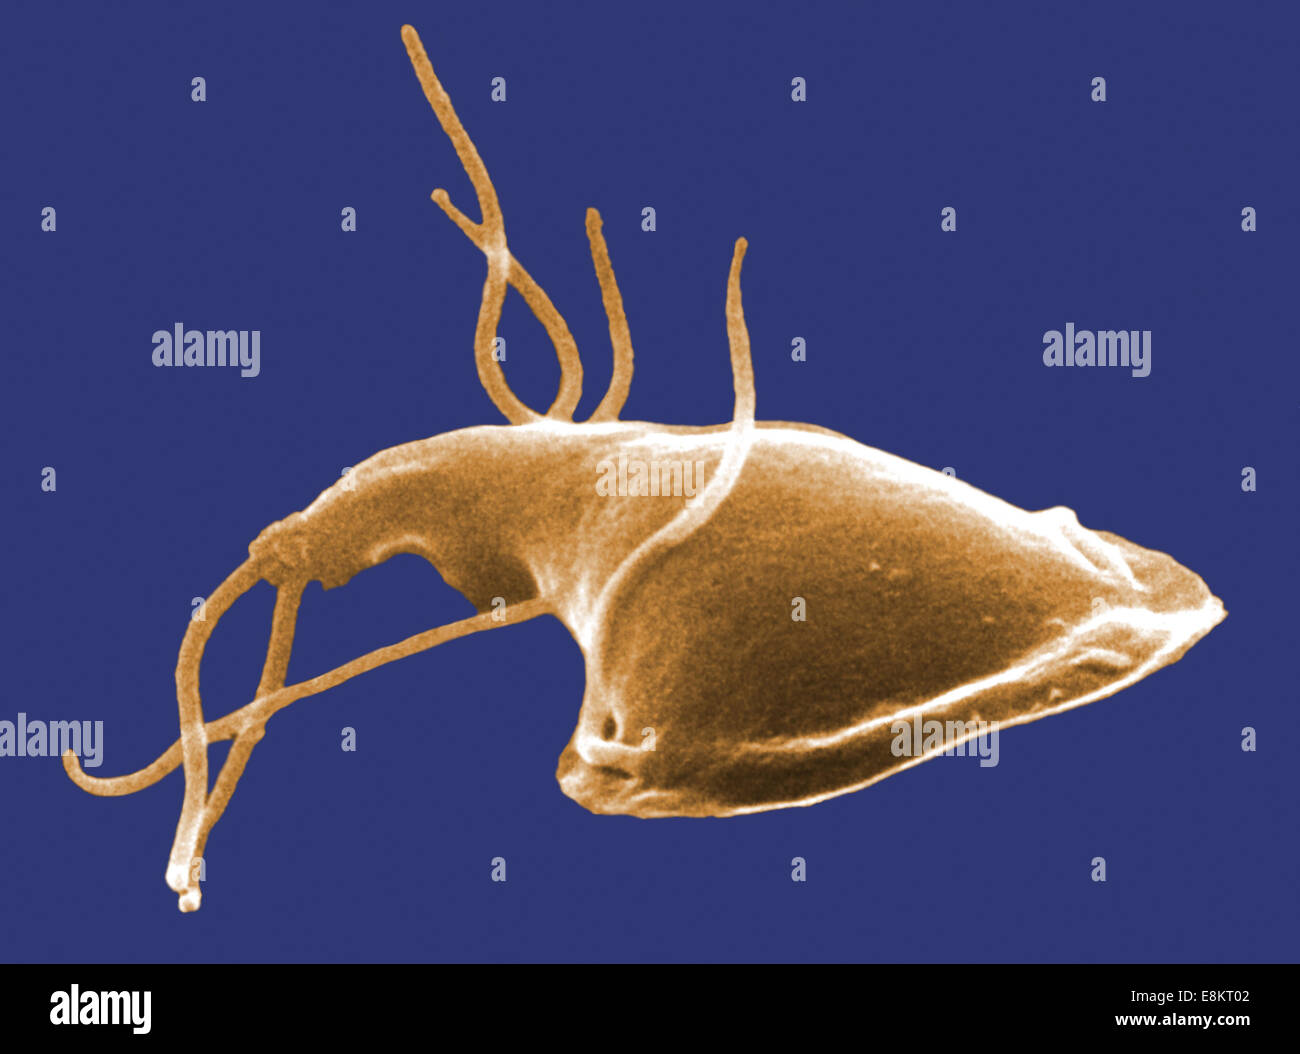 This digitally-colorized scanning electron micrograph (SEM) depicted dorsal (upper) surface of Giardia protozoan that had been Stock Photo